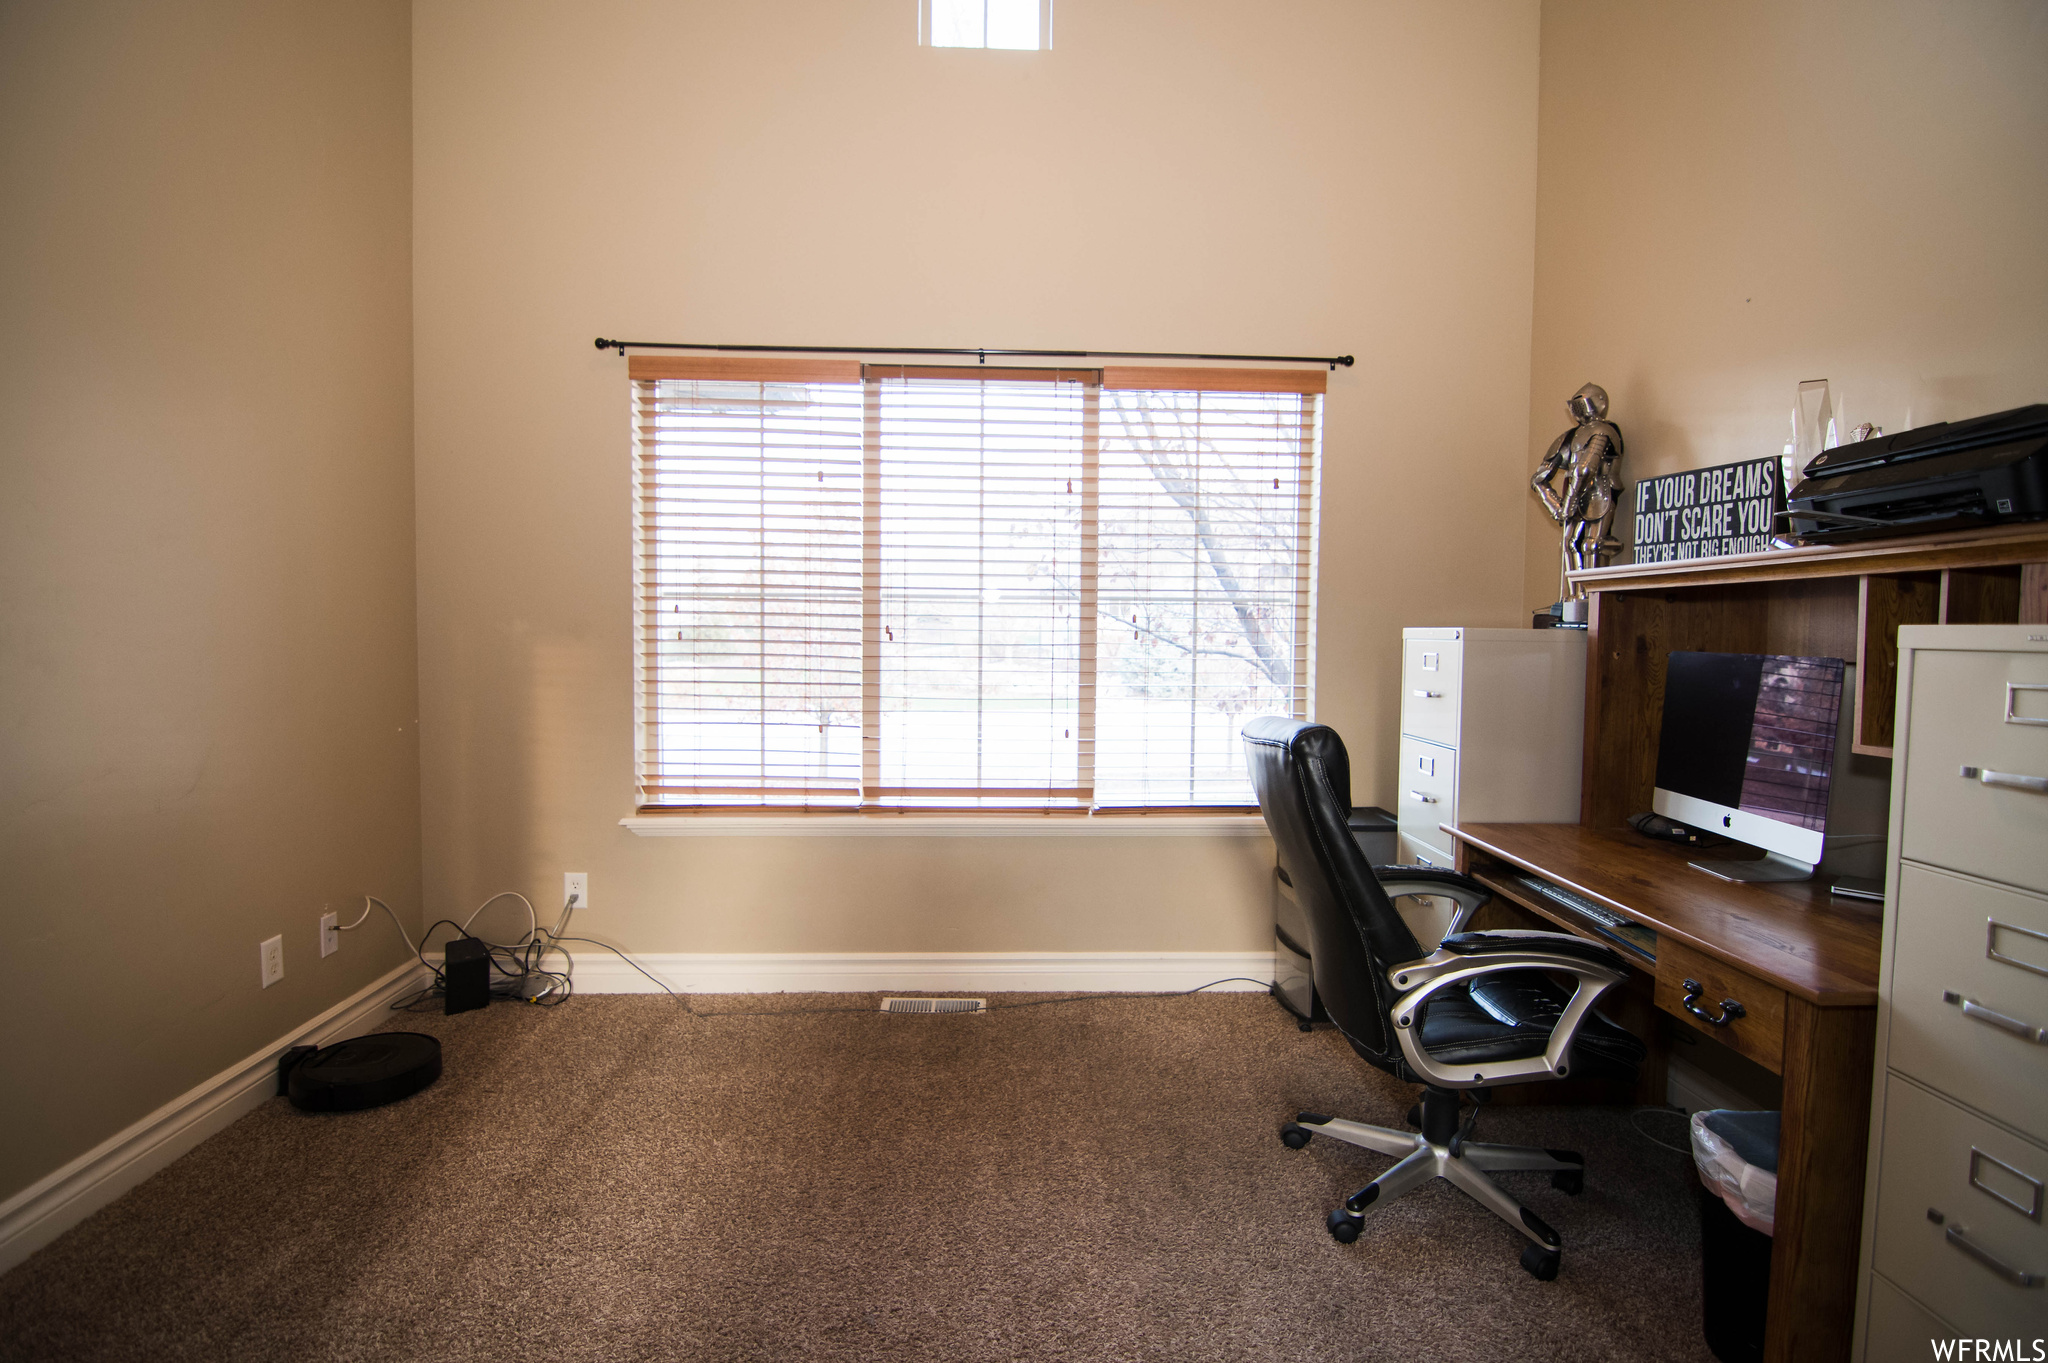 Carpeted home office with a healthy amount of sunlight